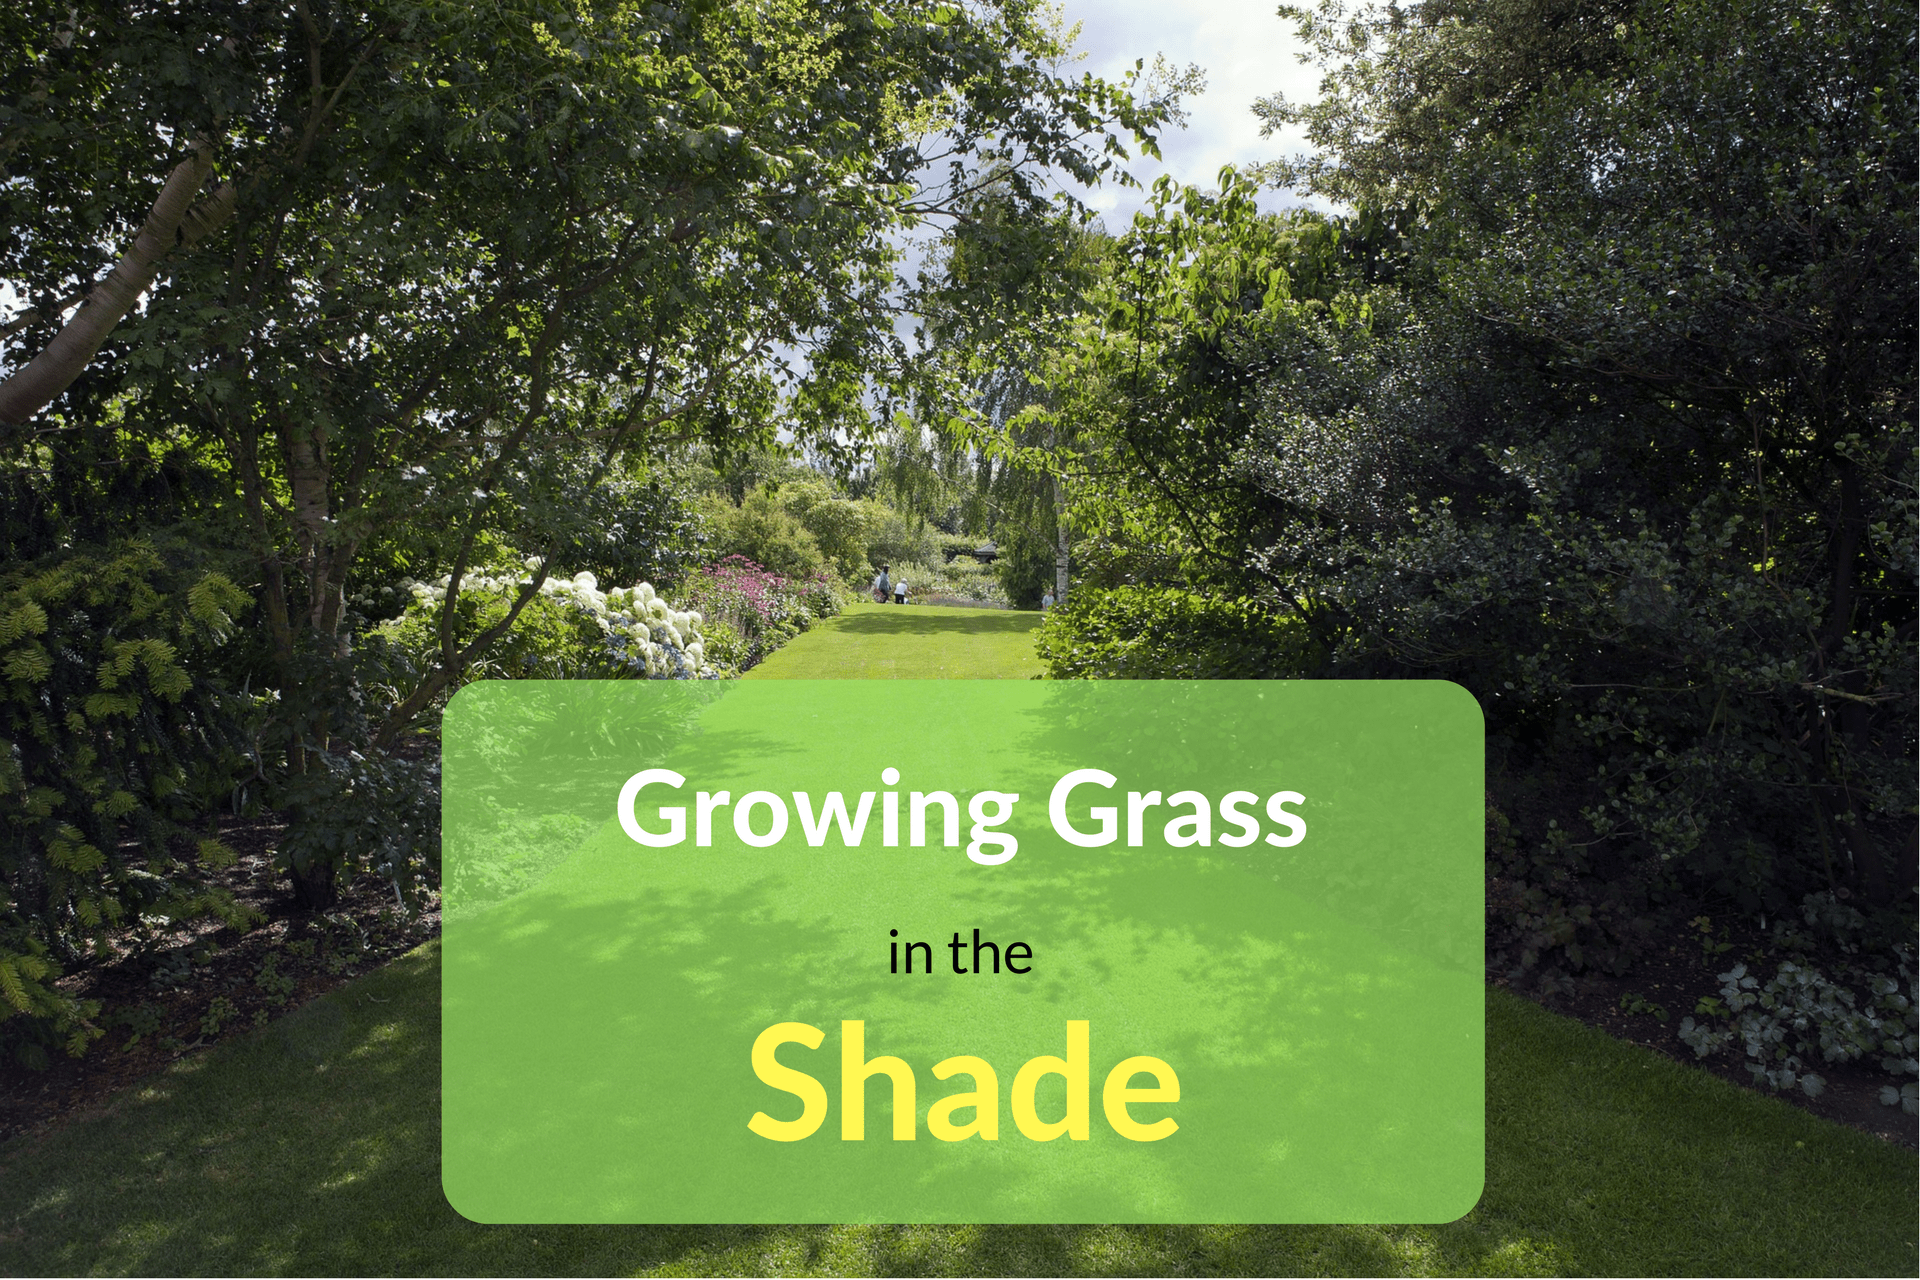 Growing Grass in the Shade